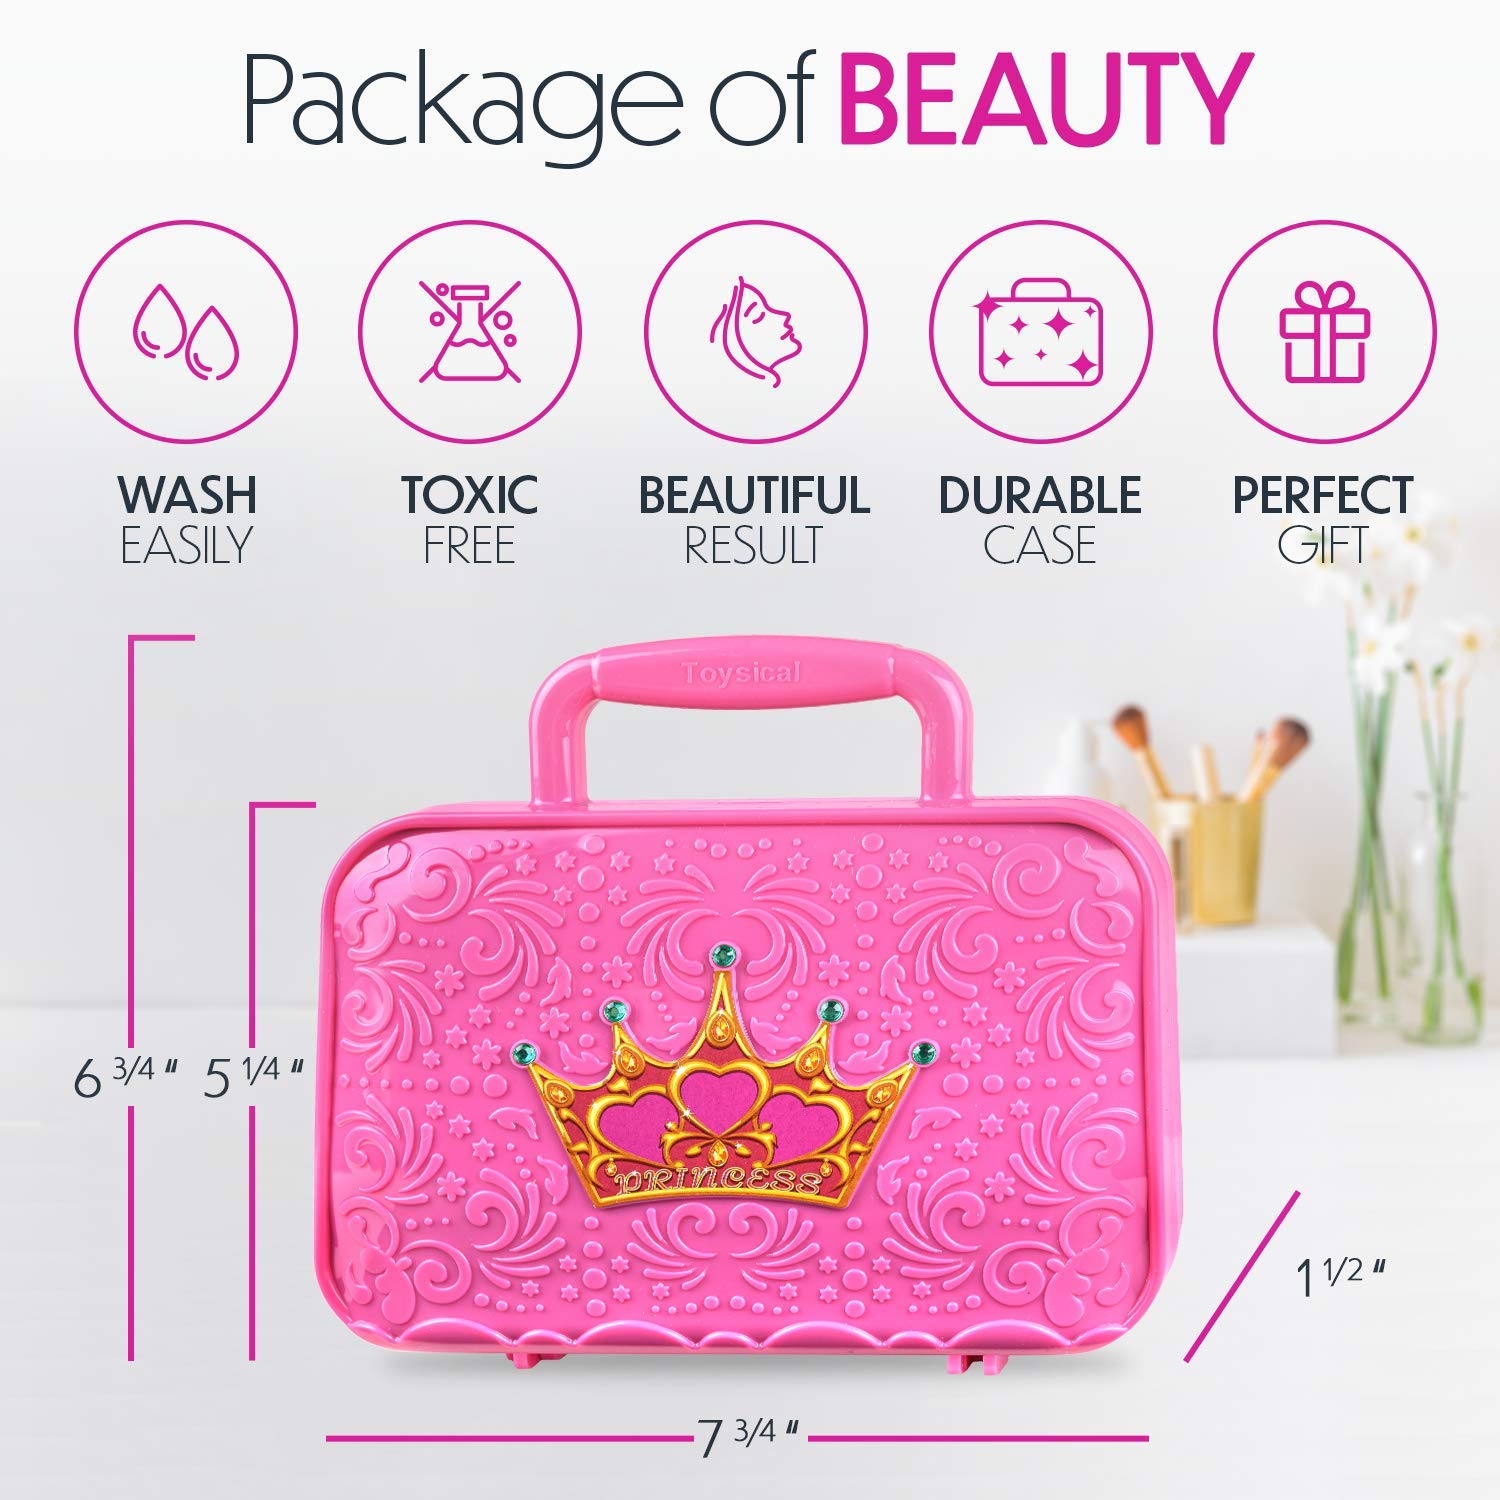 Toysical Kids Makeup Kit for Girl - with Make Up Remover - 30Pc Real Washable, Non Toxic Play Princess Cosmetic Set - Ideal Birthday for Little Girls Ages 3, 4, 5, 6 Year Old Child (Princess 2.0)